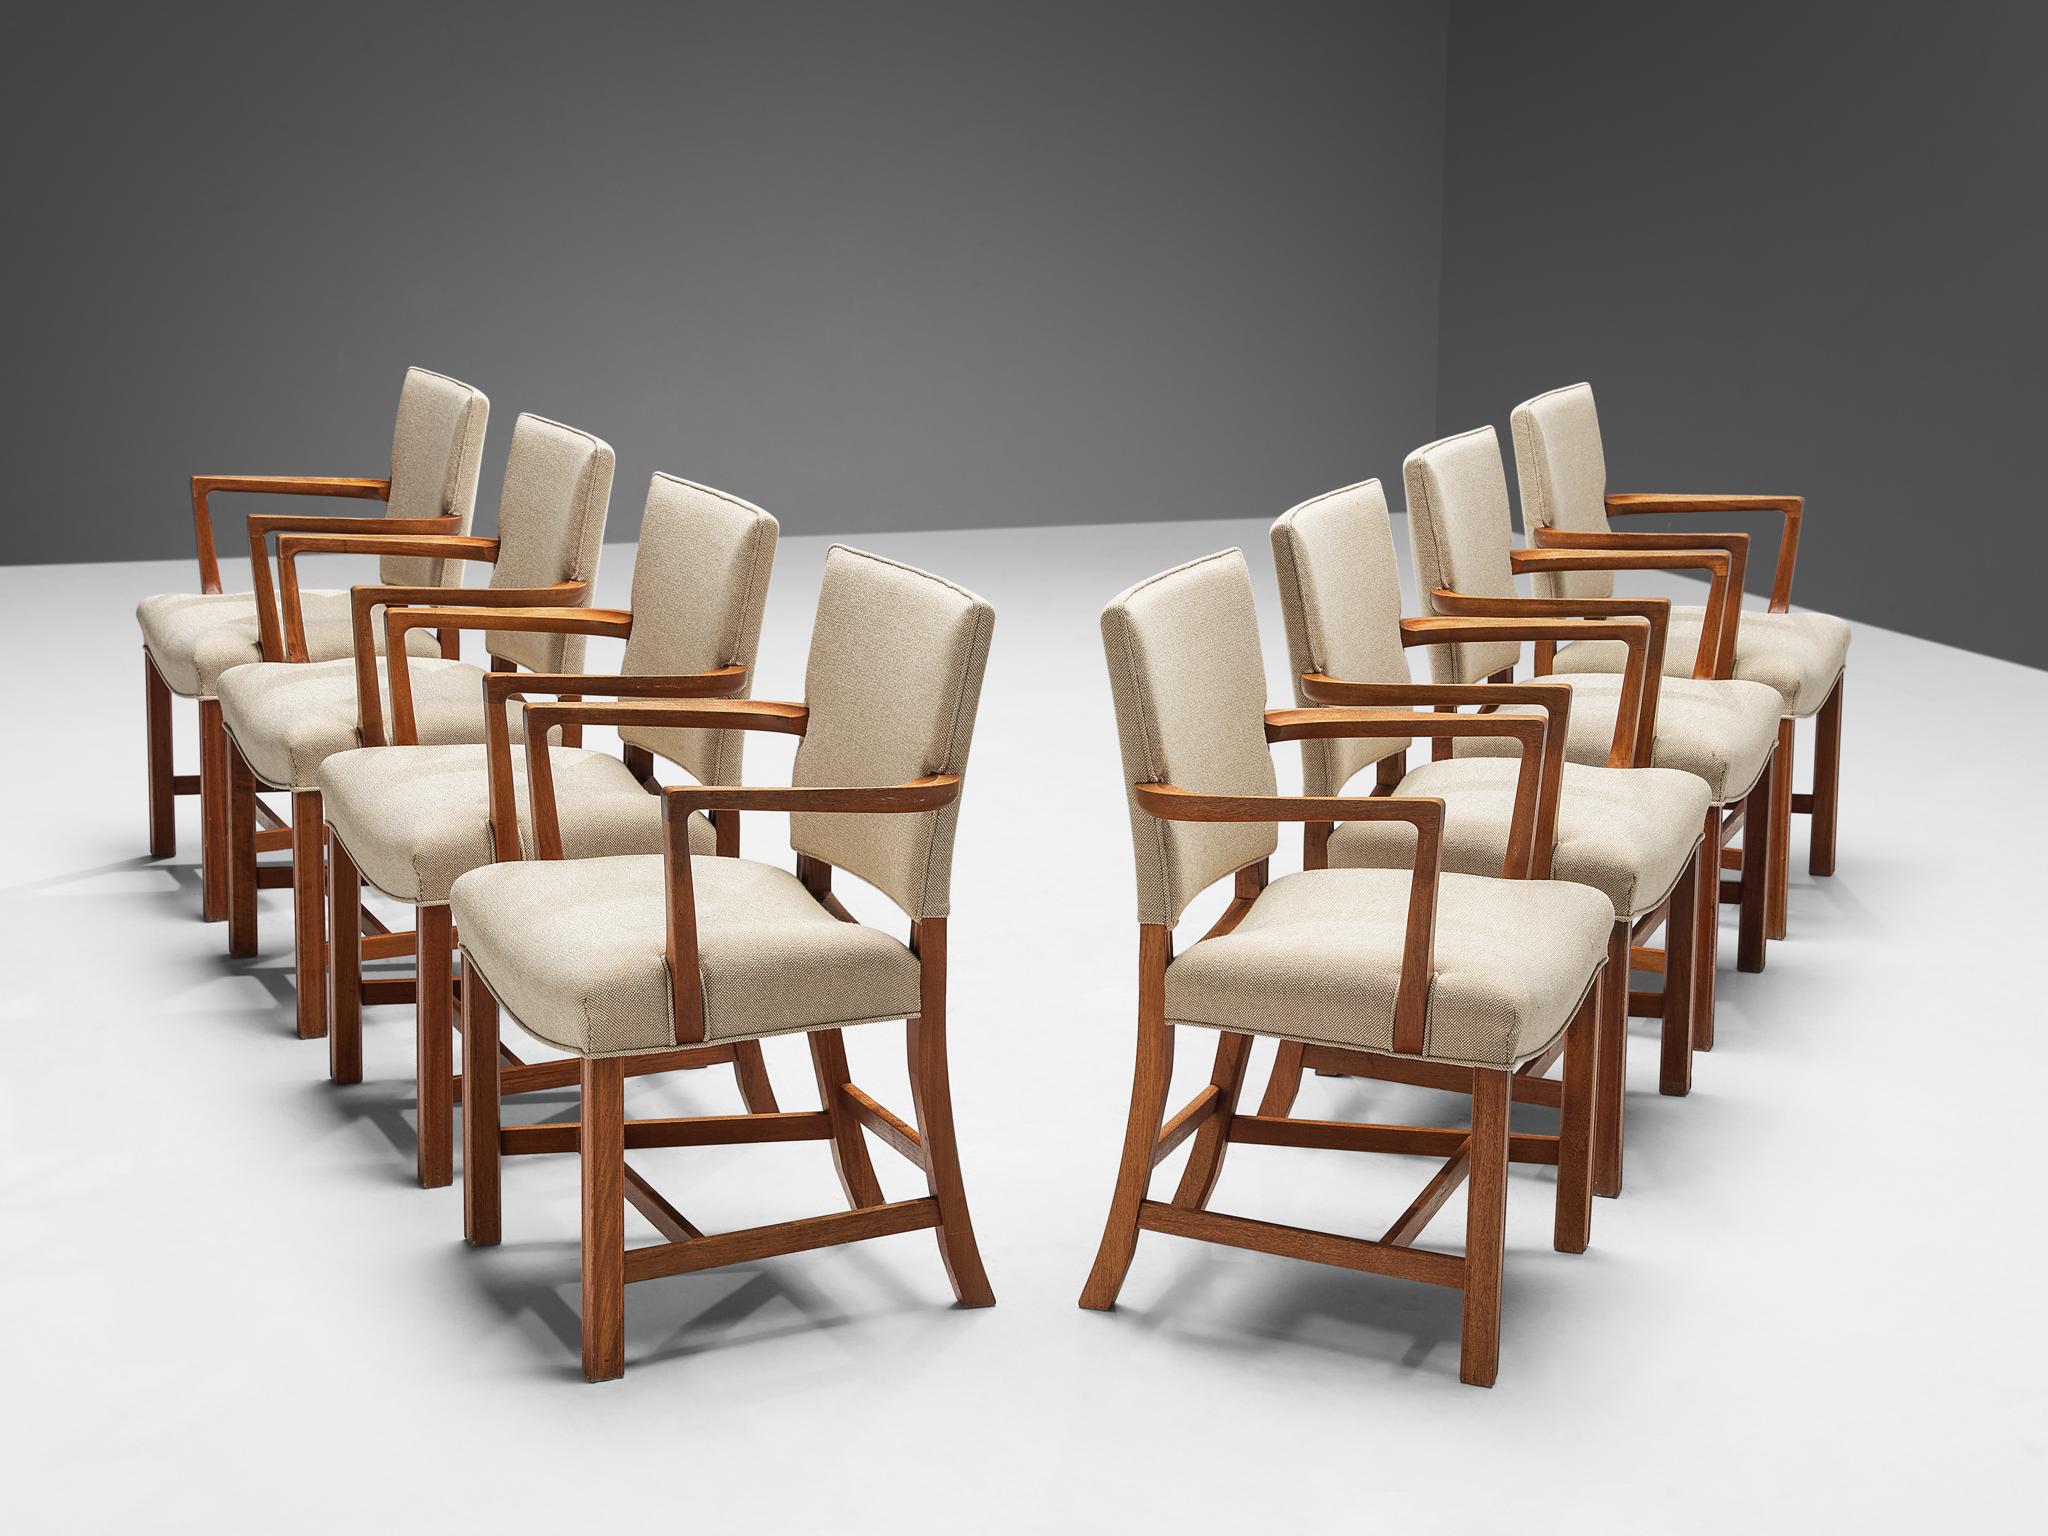 Kaare Klint for Rud Rasmussens Snedkerier, set of eight armchairs, model '3758A', teak, fabric, Denmark, design 1927 

This large set of dining chairs designed by Kaare Klint is special to come by. These chairs have very elegantly sculpted slender